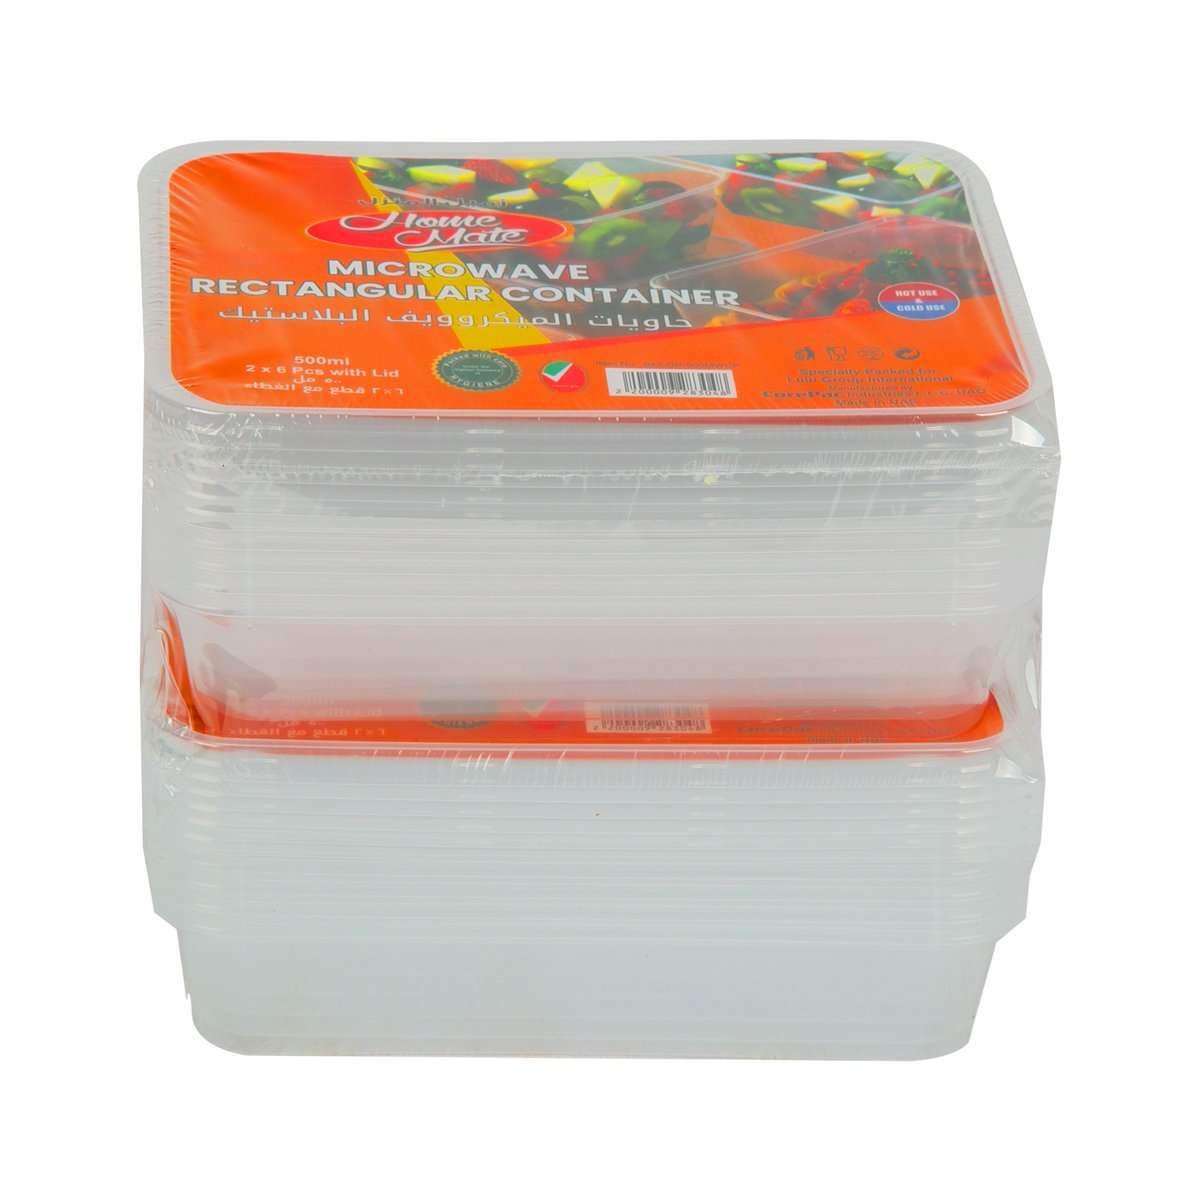 Home Mate Microwave Rectangular Container With Lid Size 500 ml 2 x 6 pcs